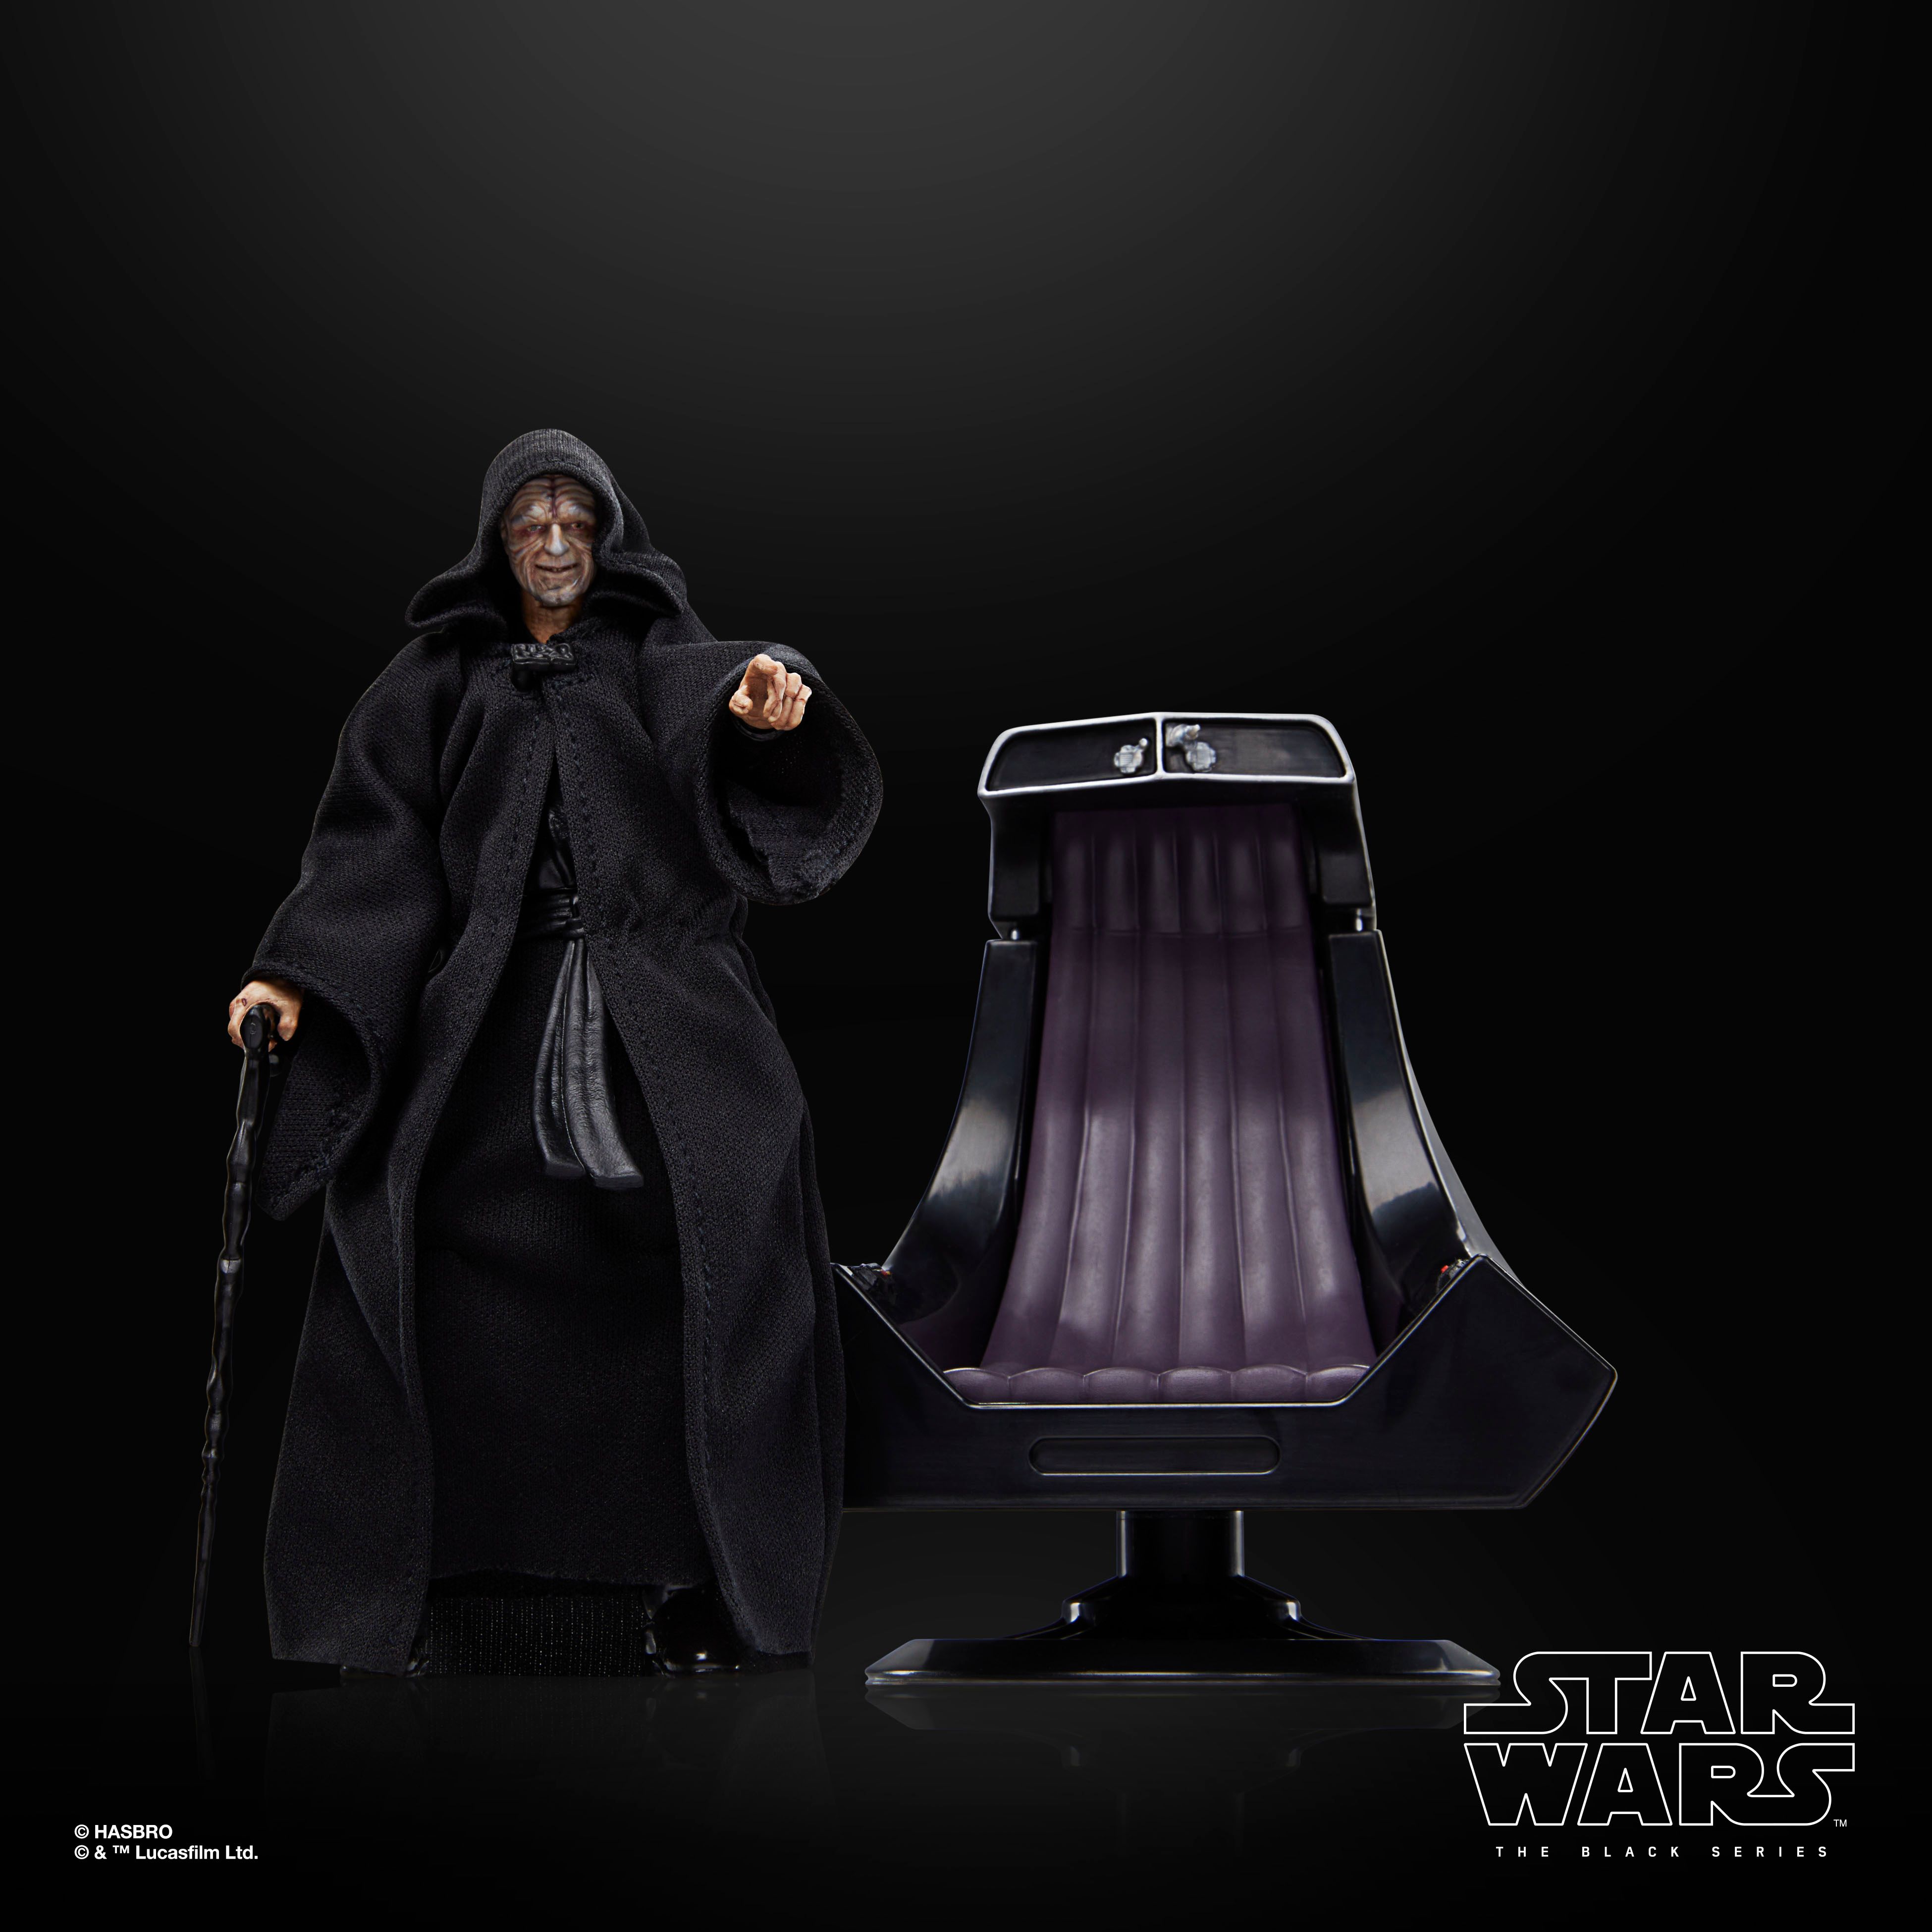 New Star Wars Black Series Deluxe Figure Sees Palpatine Claim His Throne At Last